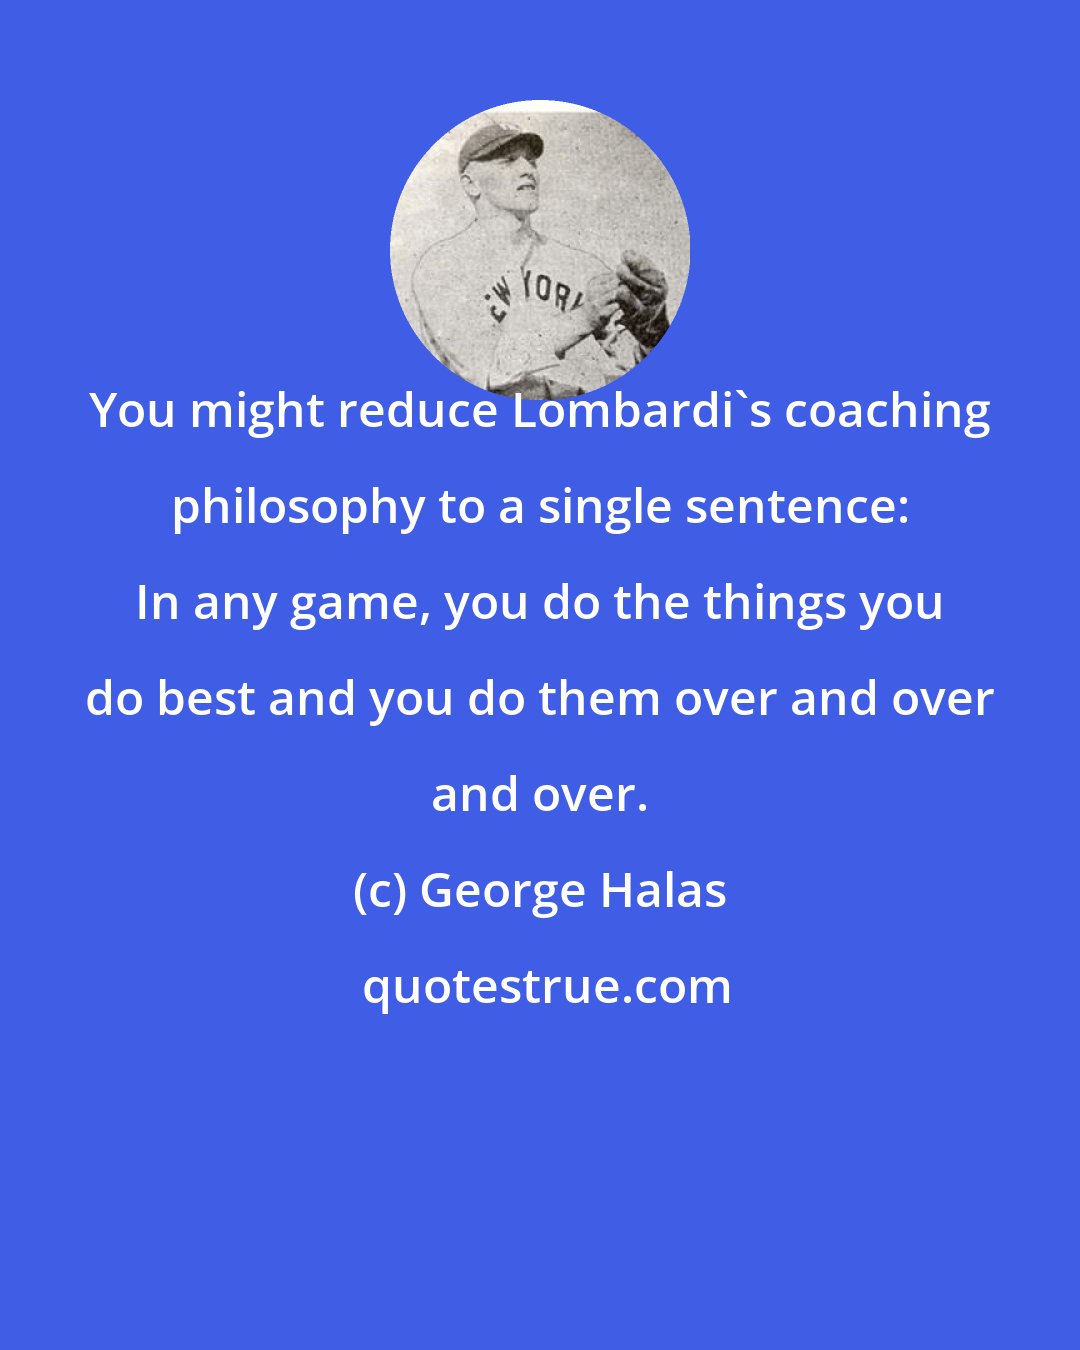 George Halas: You might reduce Lombardi's coaching philosophy to a single sentence: In any game, you do the things you do best and you do them over and over and over.